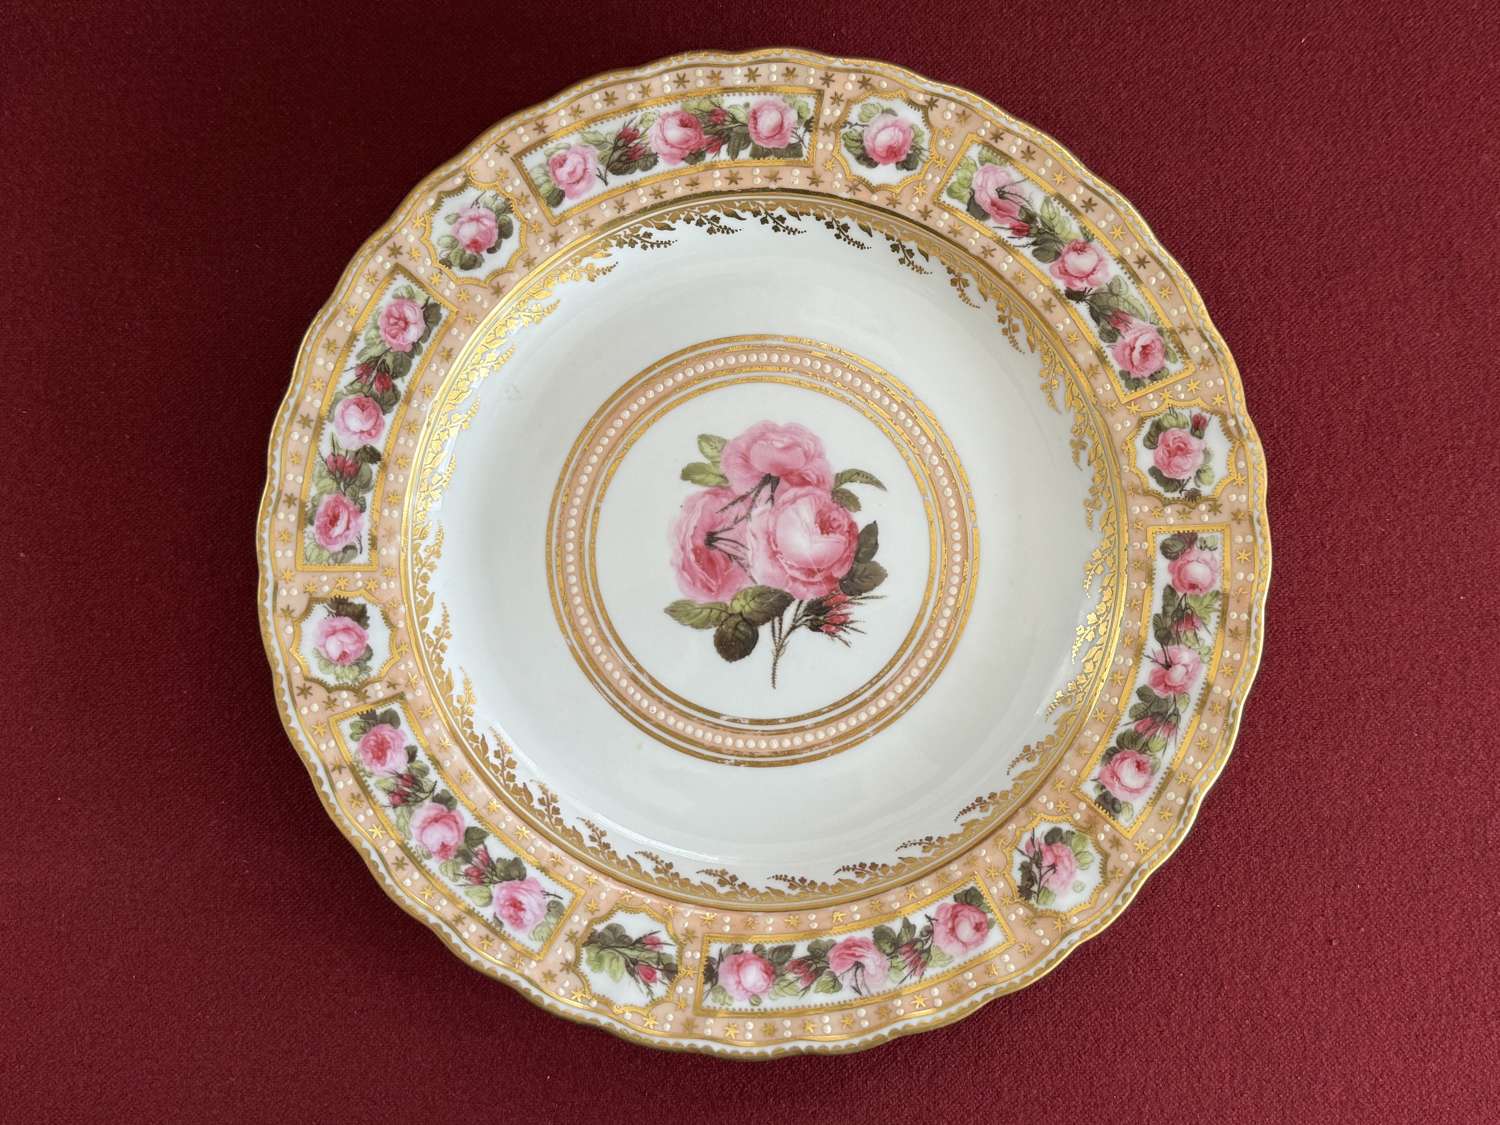 A Derby Porcelain Plate c.1790 decorated by Billingsley in pattern 129